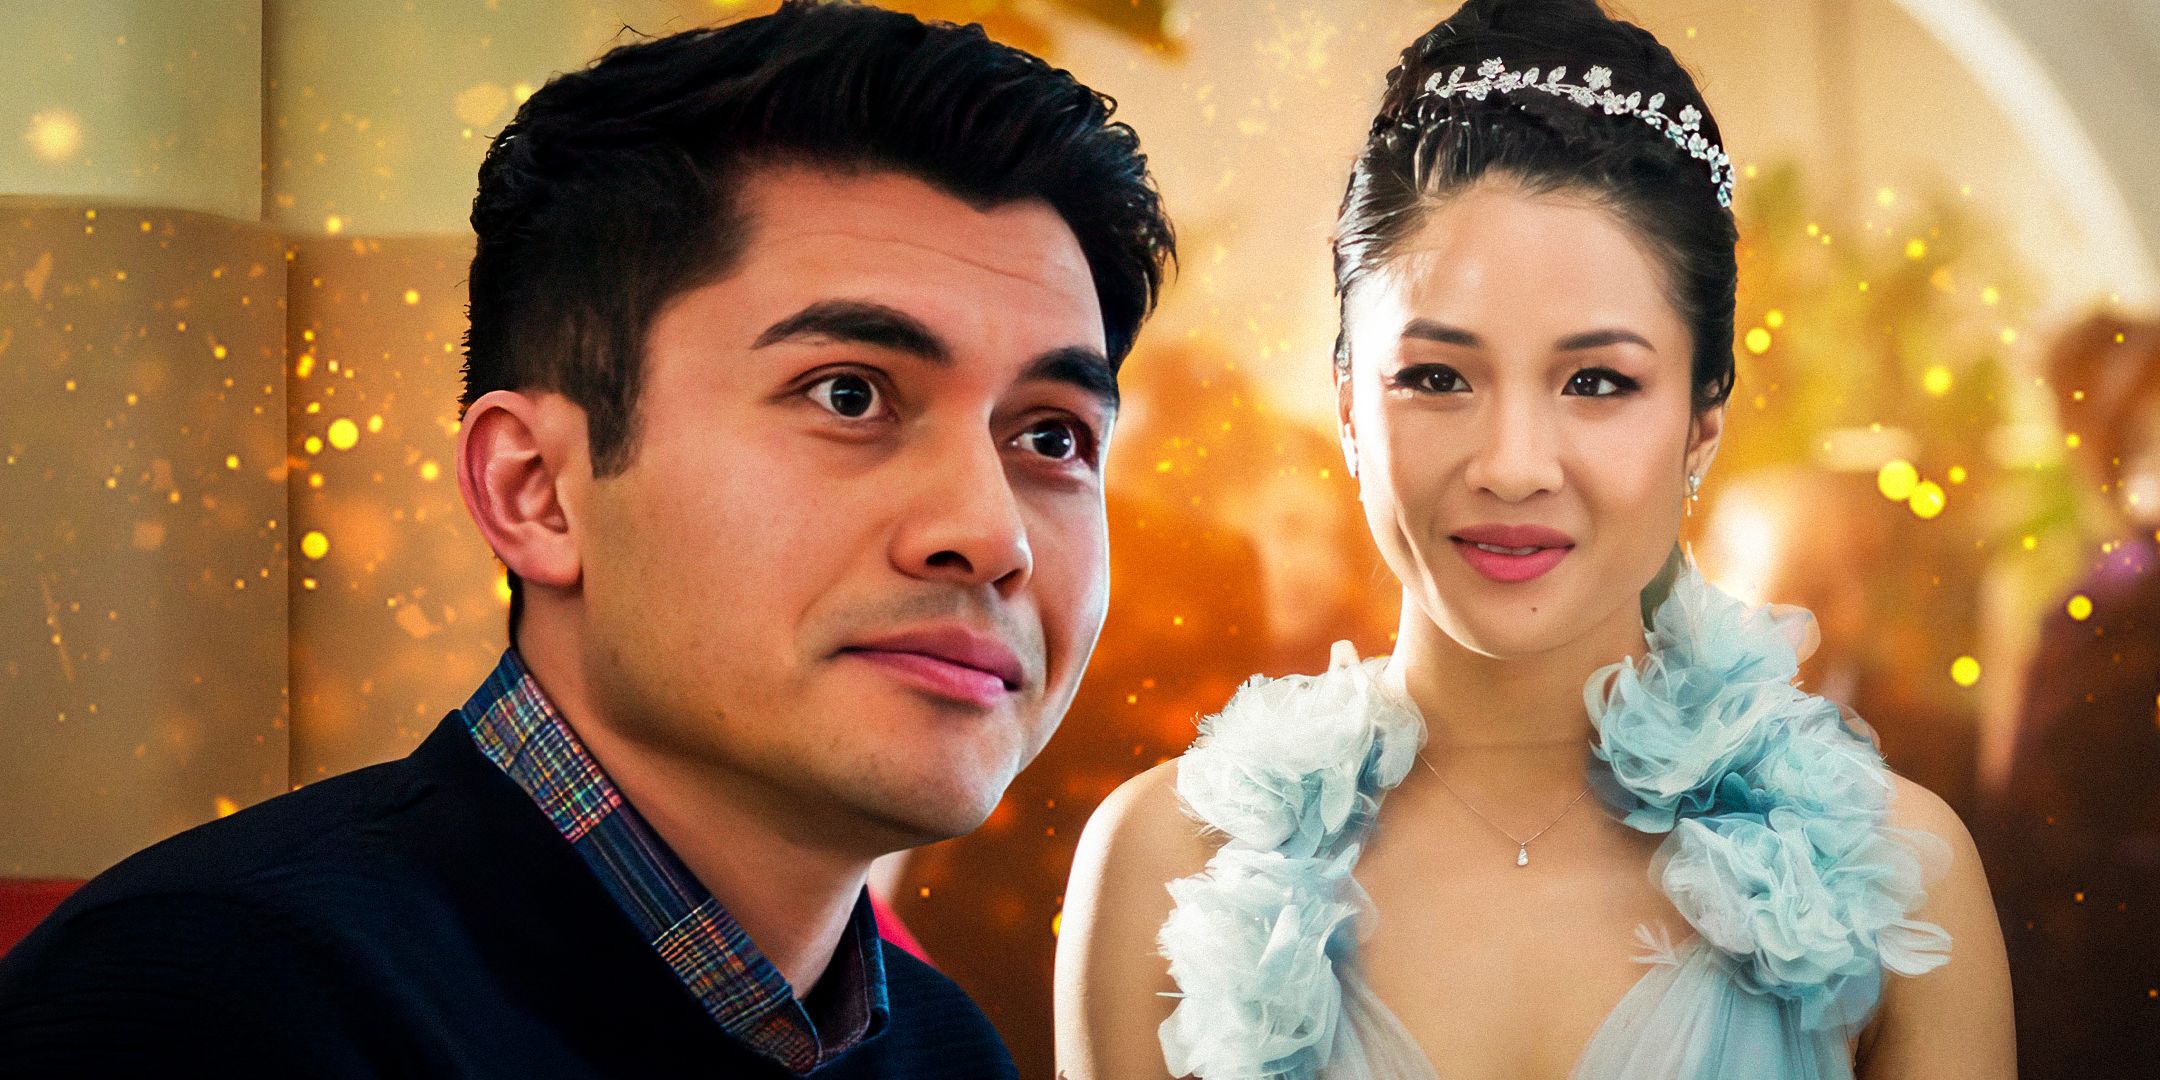 Constance Wu (Rachel Chu) and Henry Golding (Nick Young) from Crazy Rich Asians